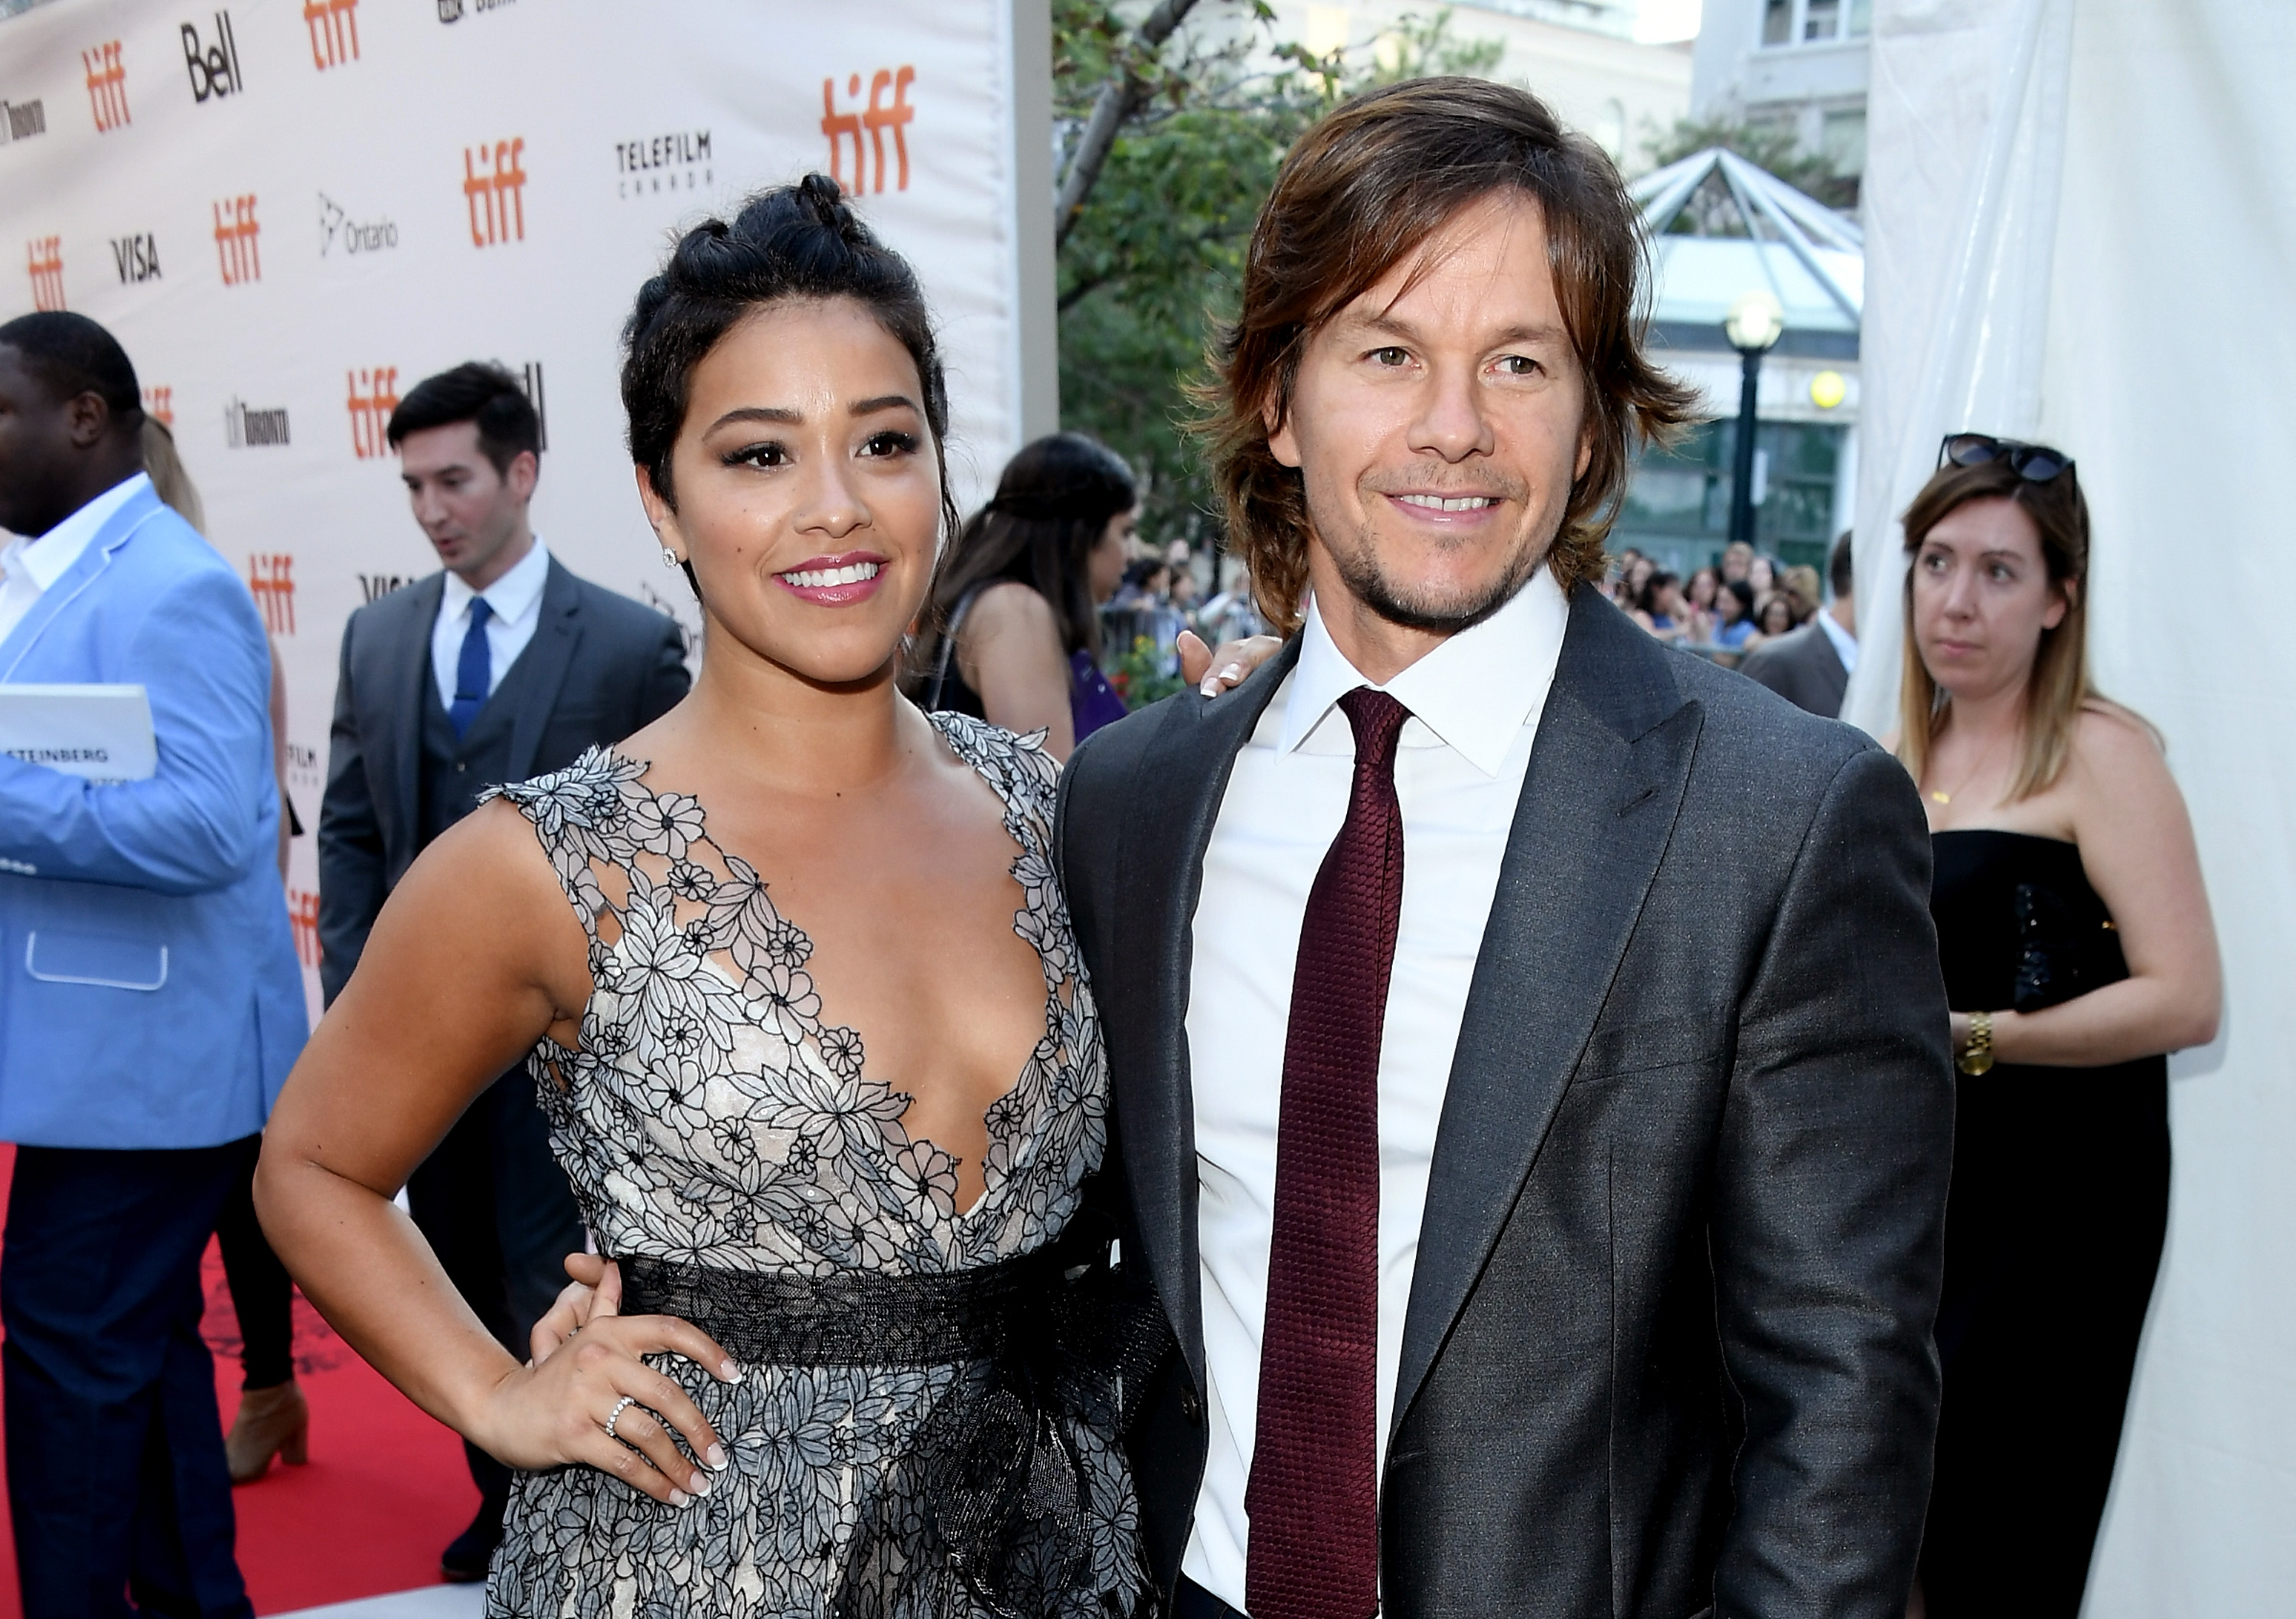 TORONTO, ON - SEPTEMBER 13:  Actors Gina Rodriguez (L) and Mark Wahlberg attend the "Deepwater Horizon" premiere during the 2016 Toronto International Film Festival at Roy Thomson Hall on September 13, 2016 in Toronto, Canada.  (Photo by George Pimentel/WireImage)